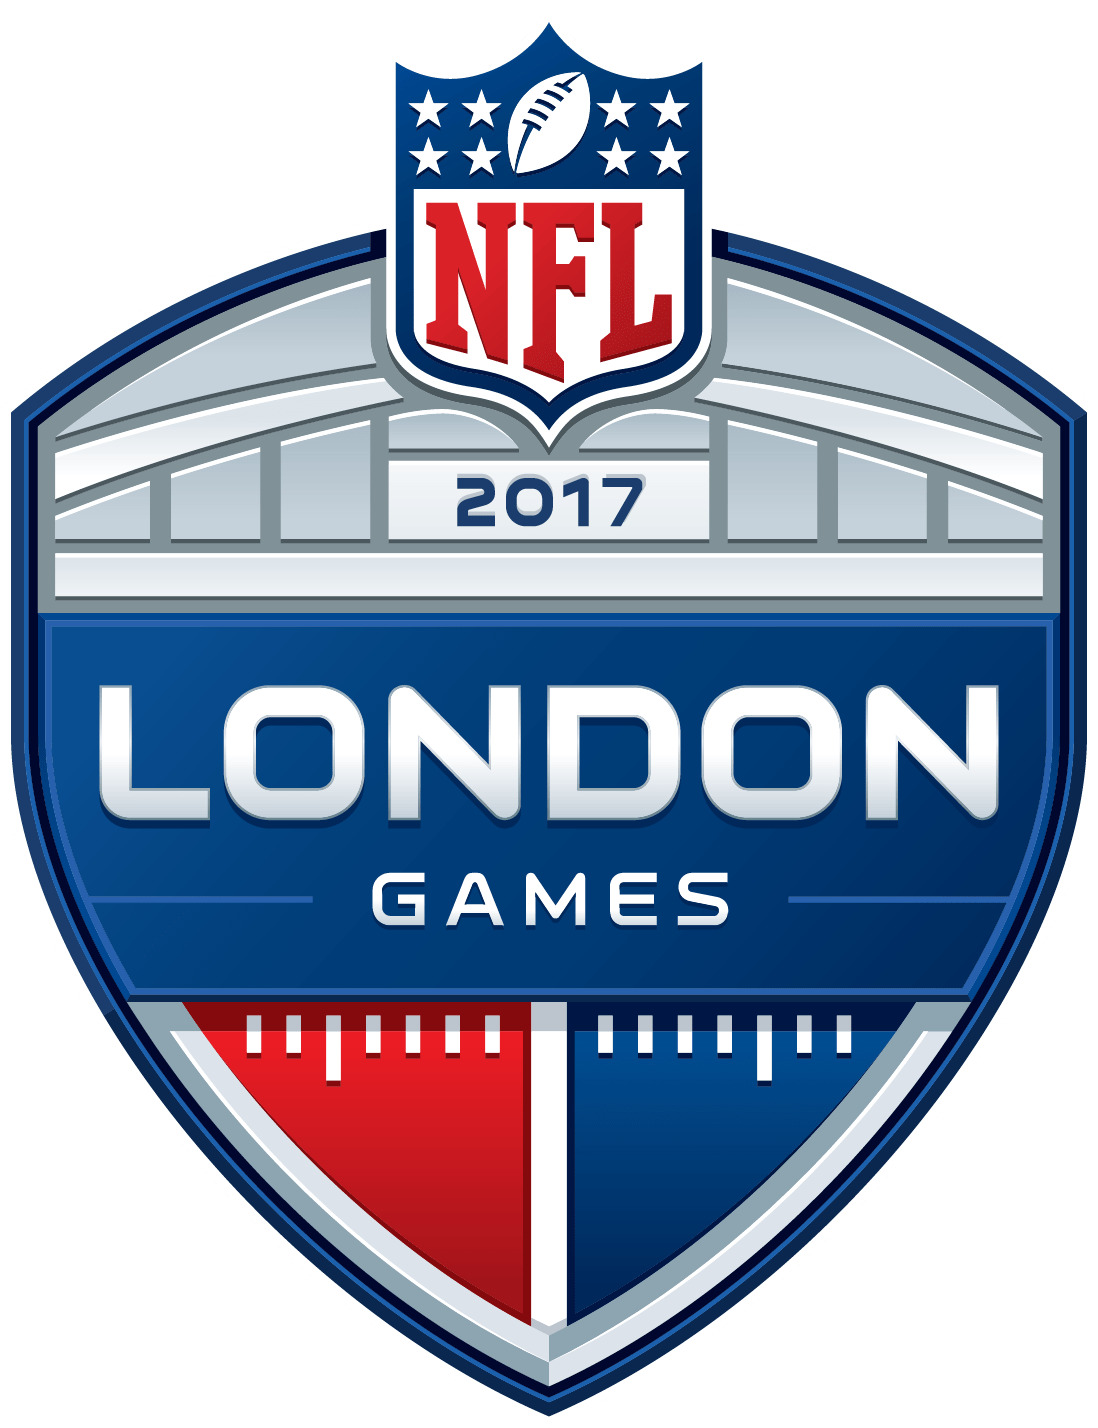 NFL 2017 London Games icons